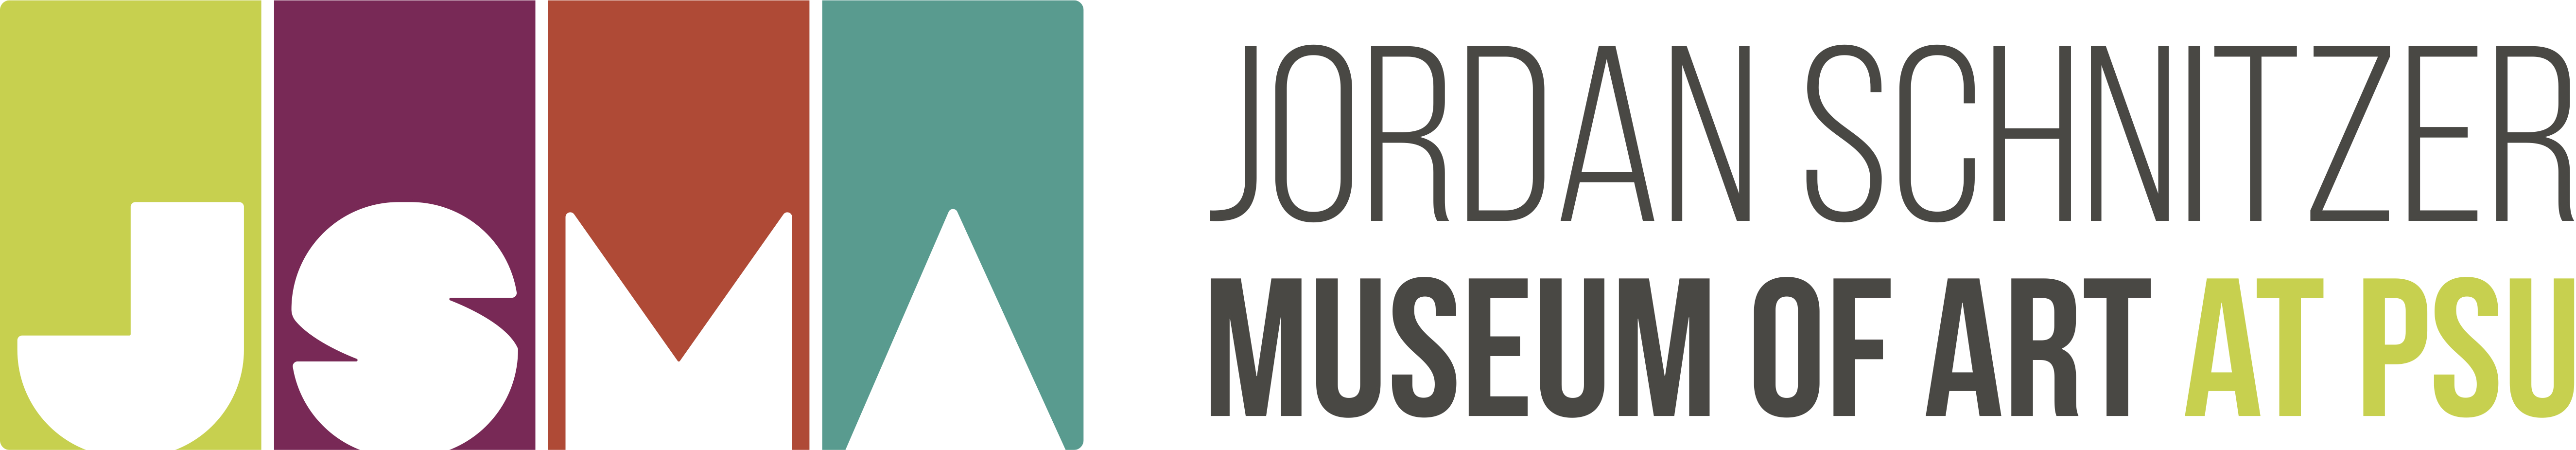 JSMA Logo, Letterforms J S M A, and text: Jordan Schnitzer Museum of Art at PSU